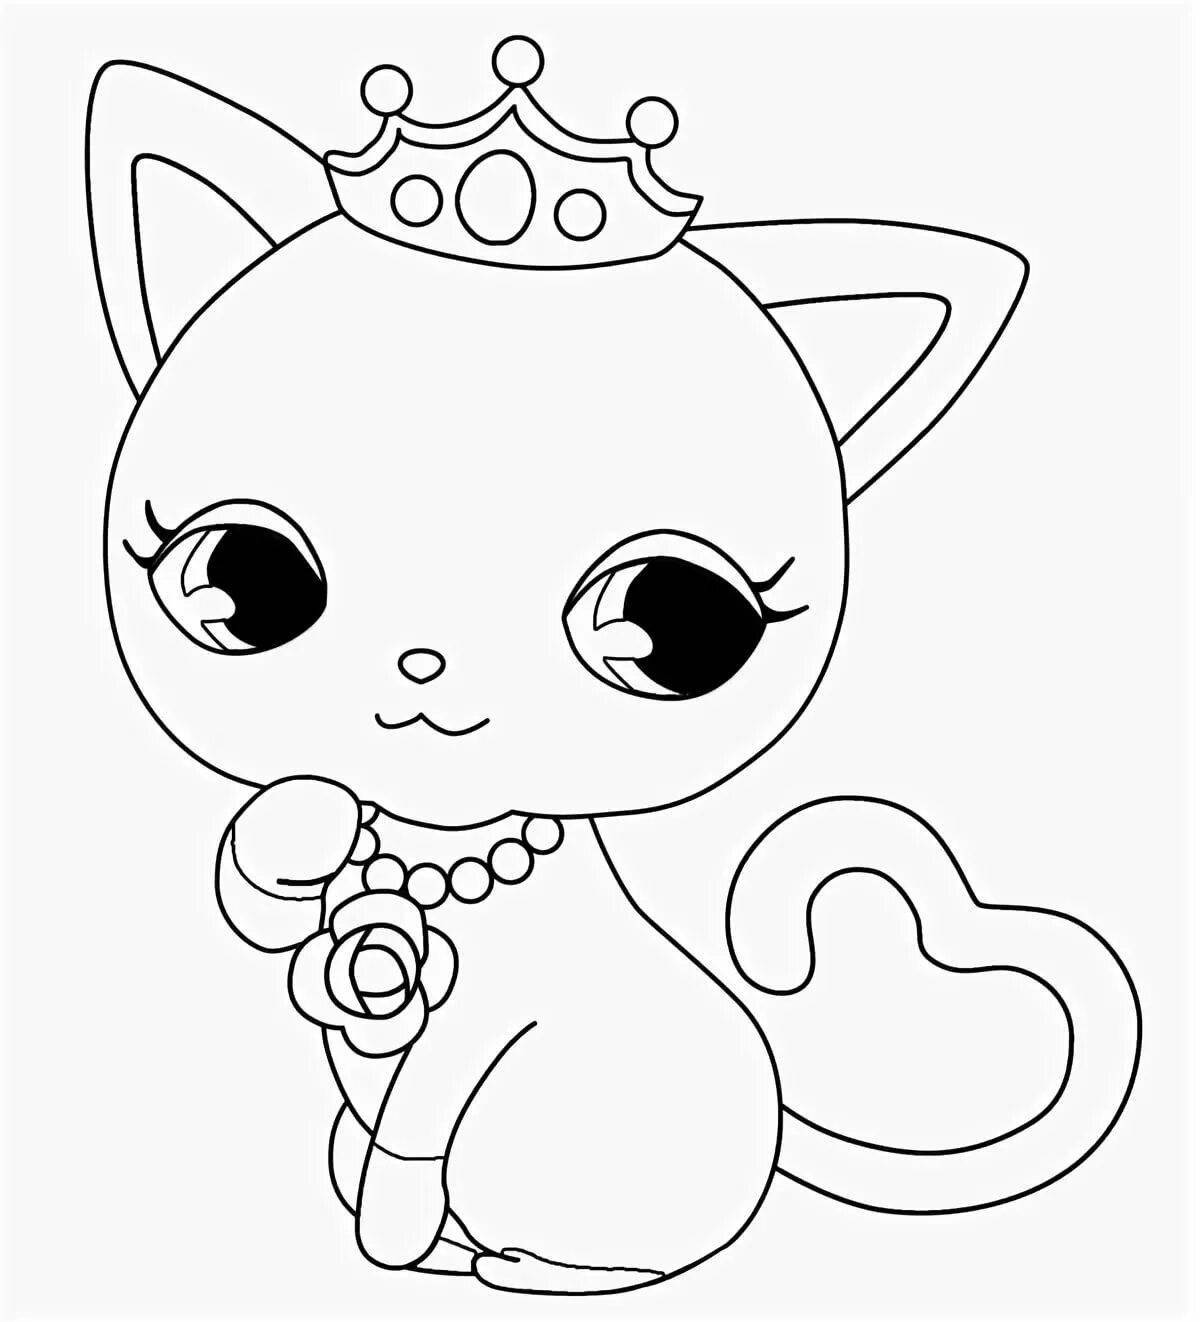 Playful and fluffy cat coloring pages for kids